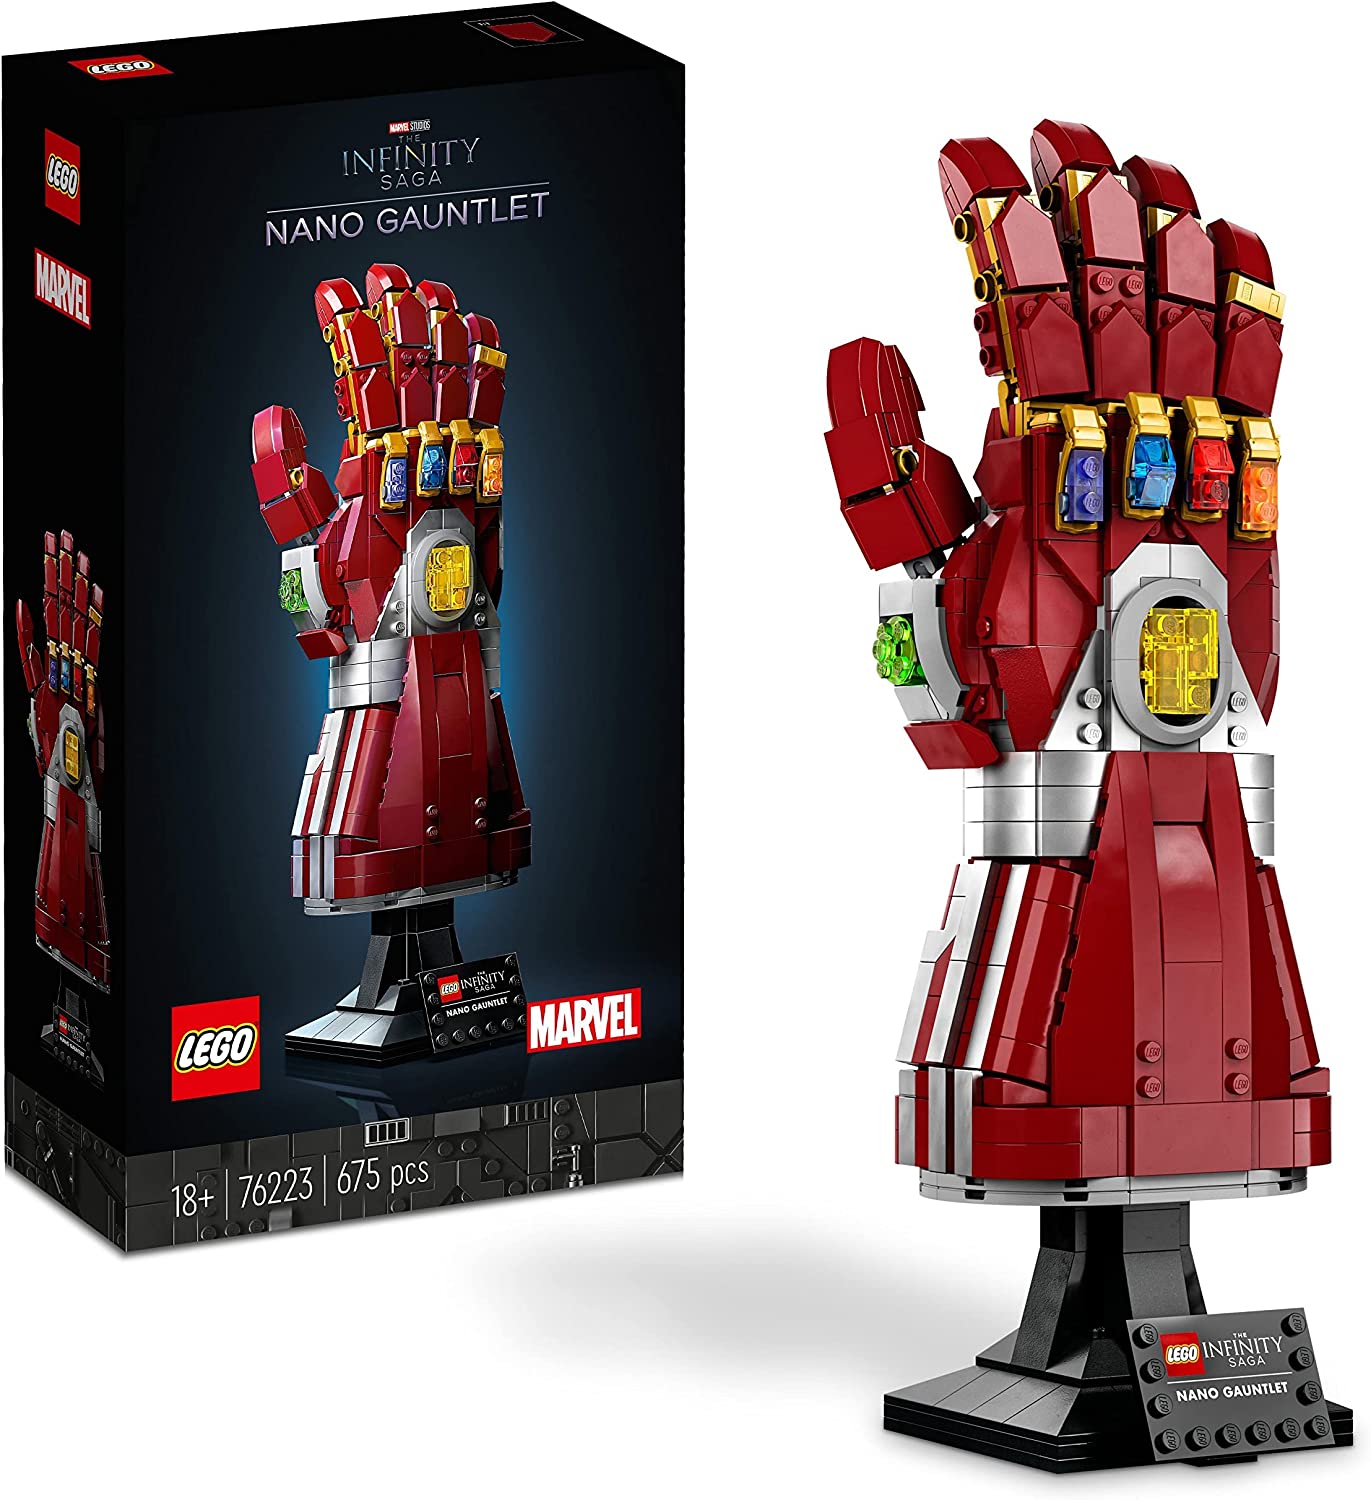 LEGO 76223 Marvel Iron Mans Nano Glove Buildable Iron Man Model with Infinity Stones Avengers Endgame Movie Set Adult Collectible